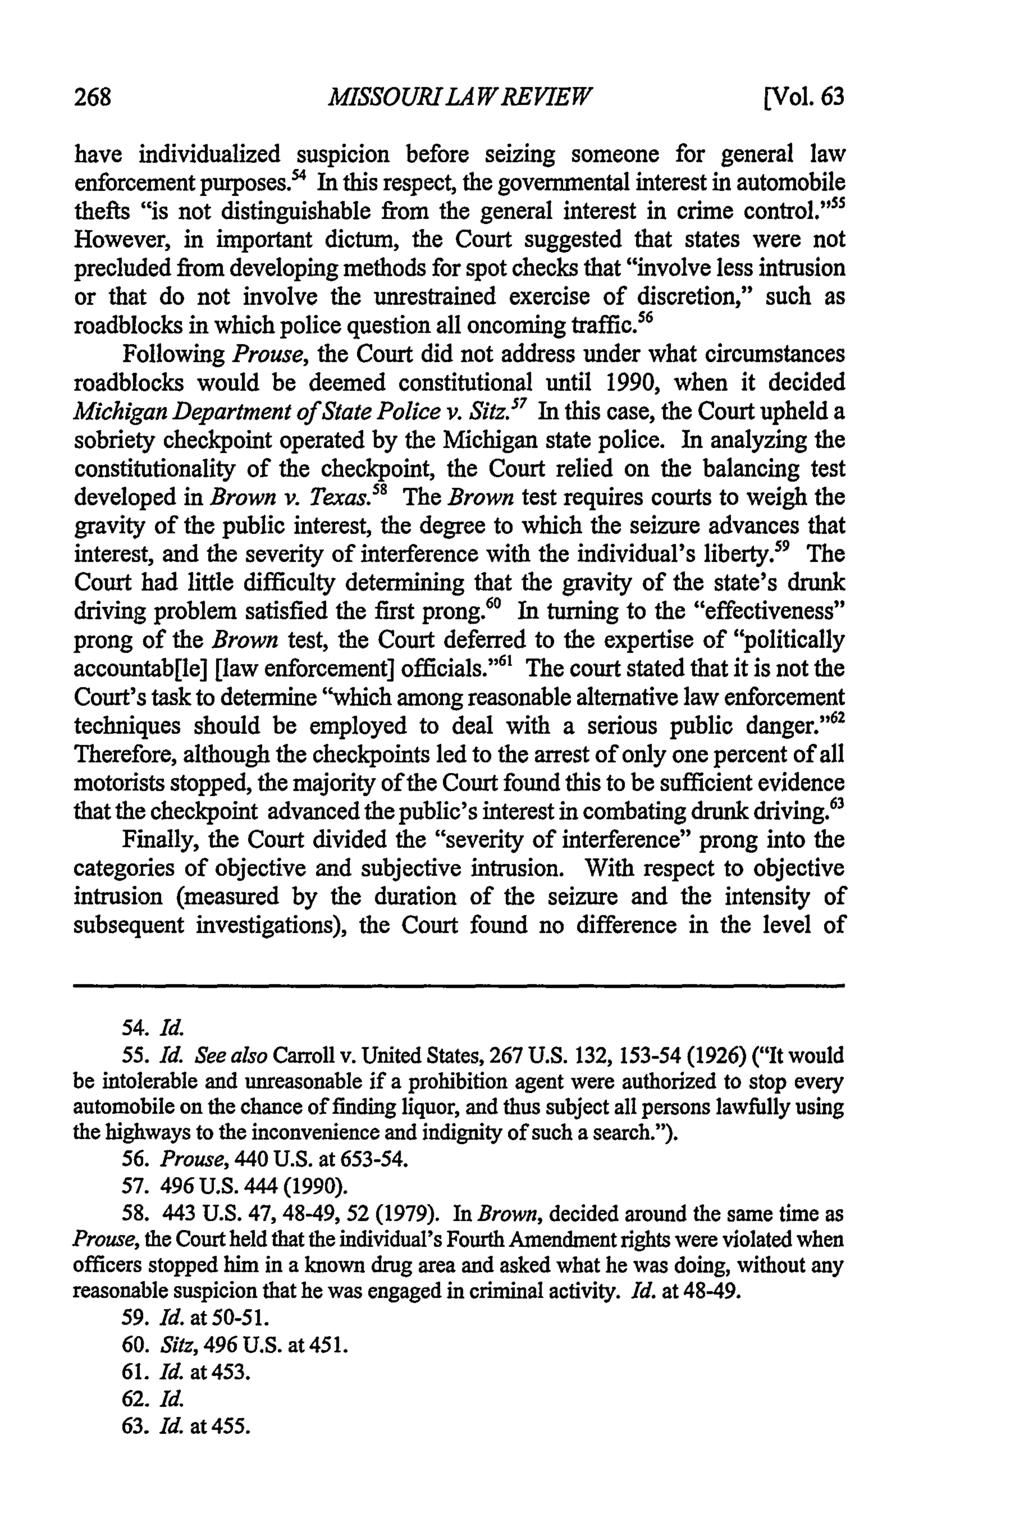 Missouri Law Review, Vol. 63, Iss. 1 [1998], Art. 14 MISSOURILAWREVIEW [Vol. 63 have individualized suspicion before seizing someone for general law enforcement purposes.